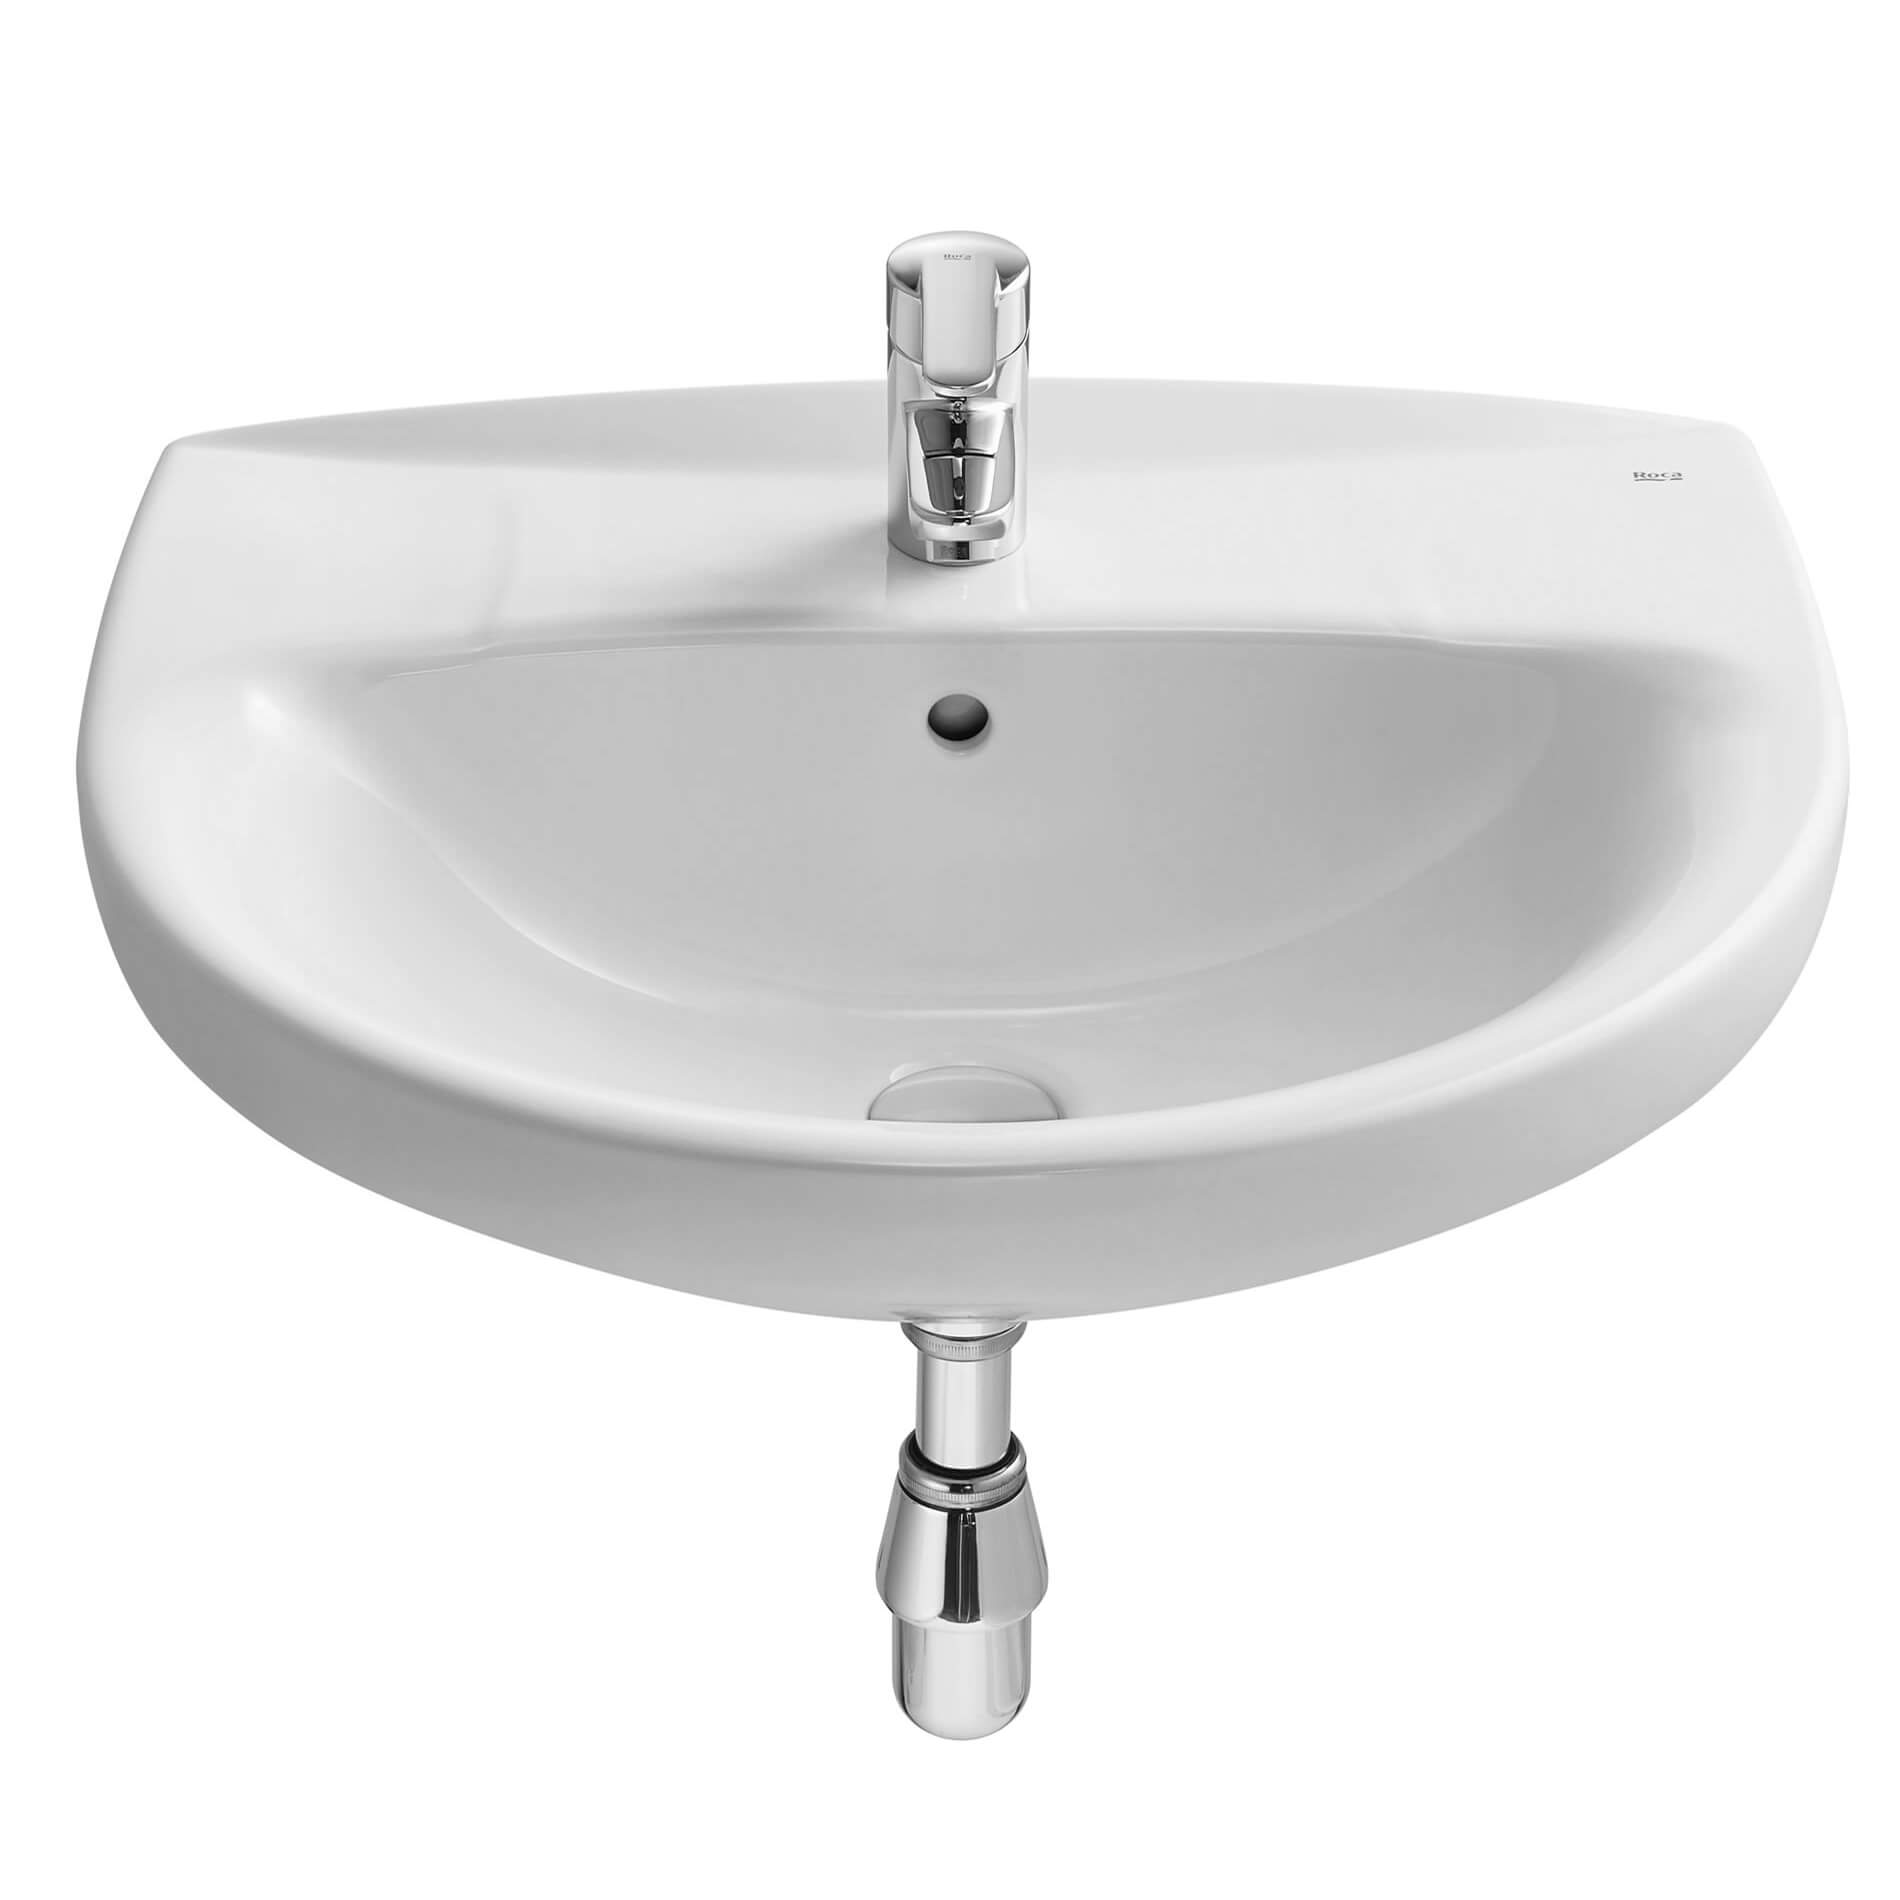 Roca Laura 1 Tap Hole Wall Hung Basin 520mm Wide - 325394000